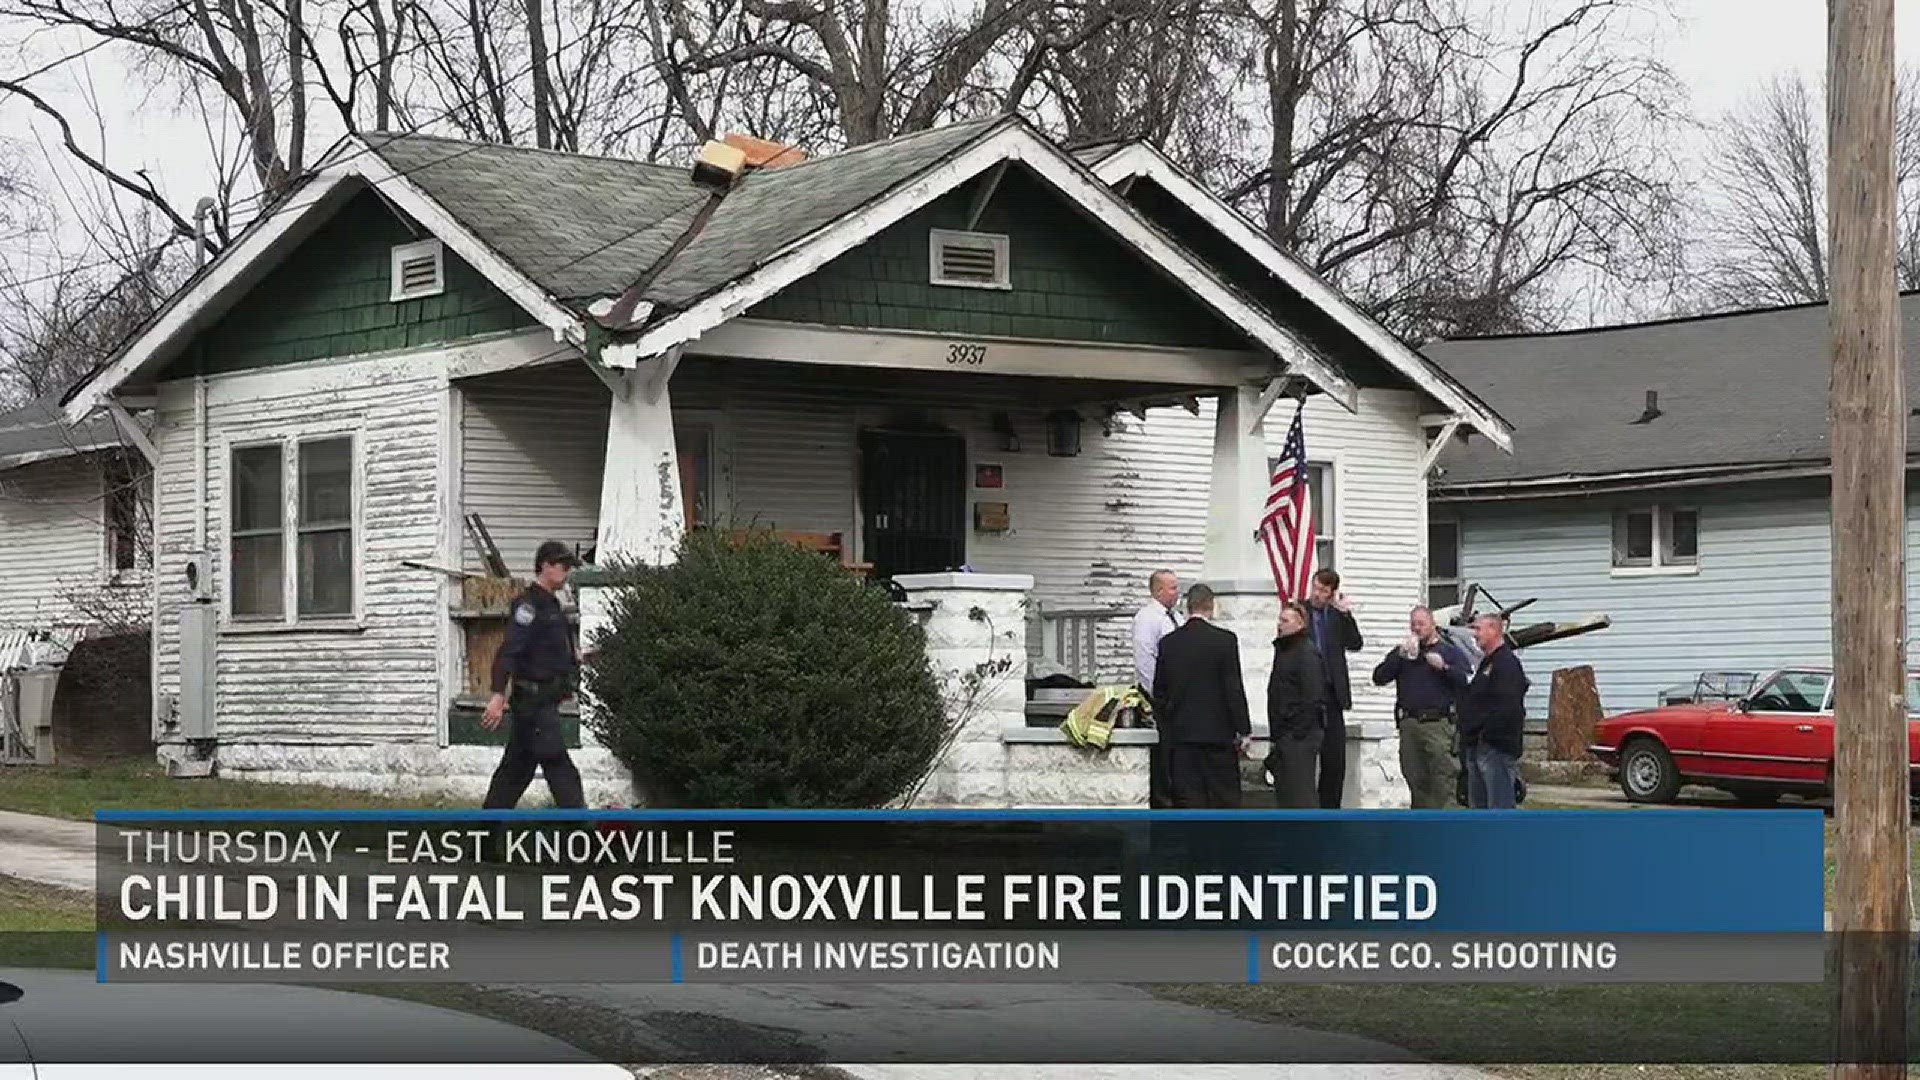 Firefighters found Jesse England in a bedroom near the corner of the structure on the 3900 block of Alma Avenue on Thursday afternoon, according to KFD.